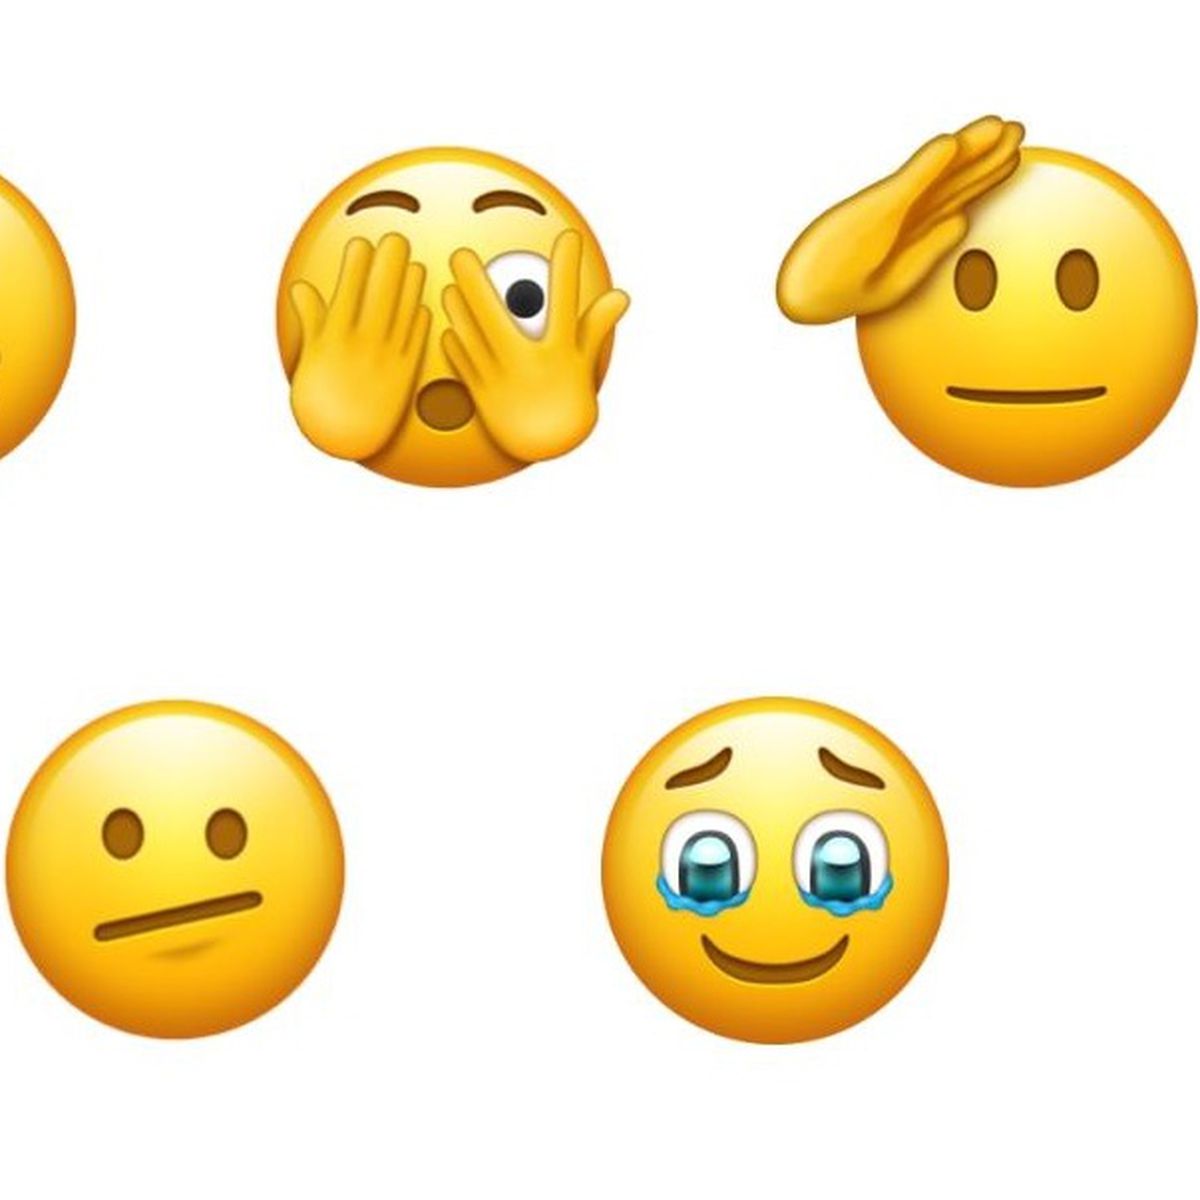 Melting face' and 36 other emojis arrive with Apple's iOS 15.4 beta